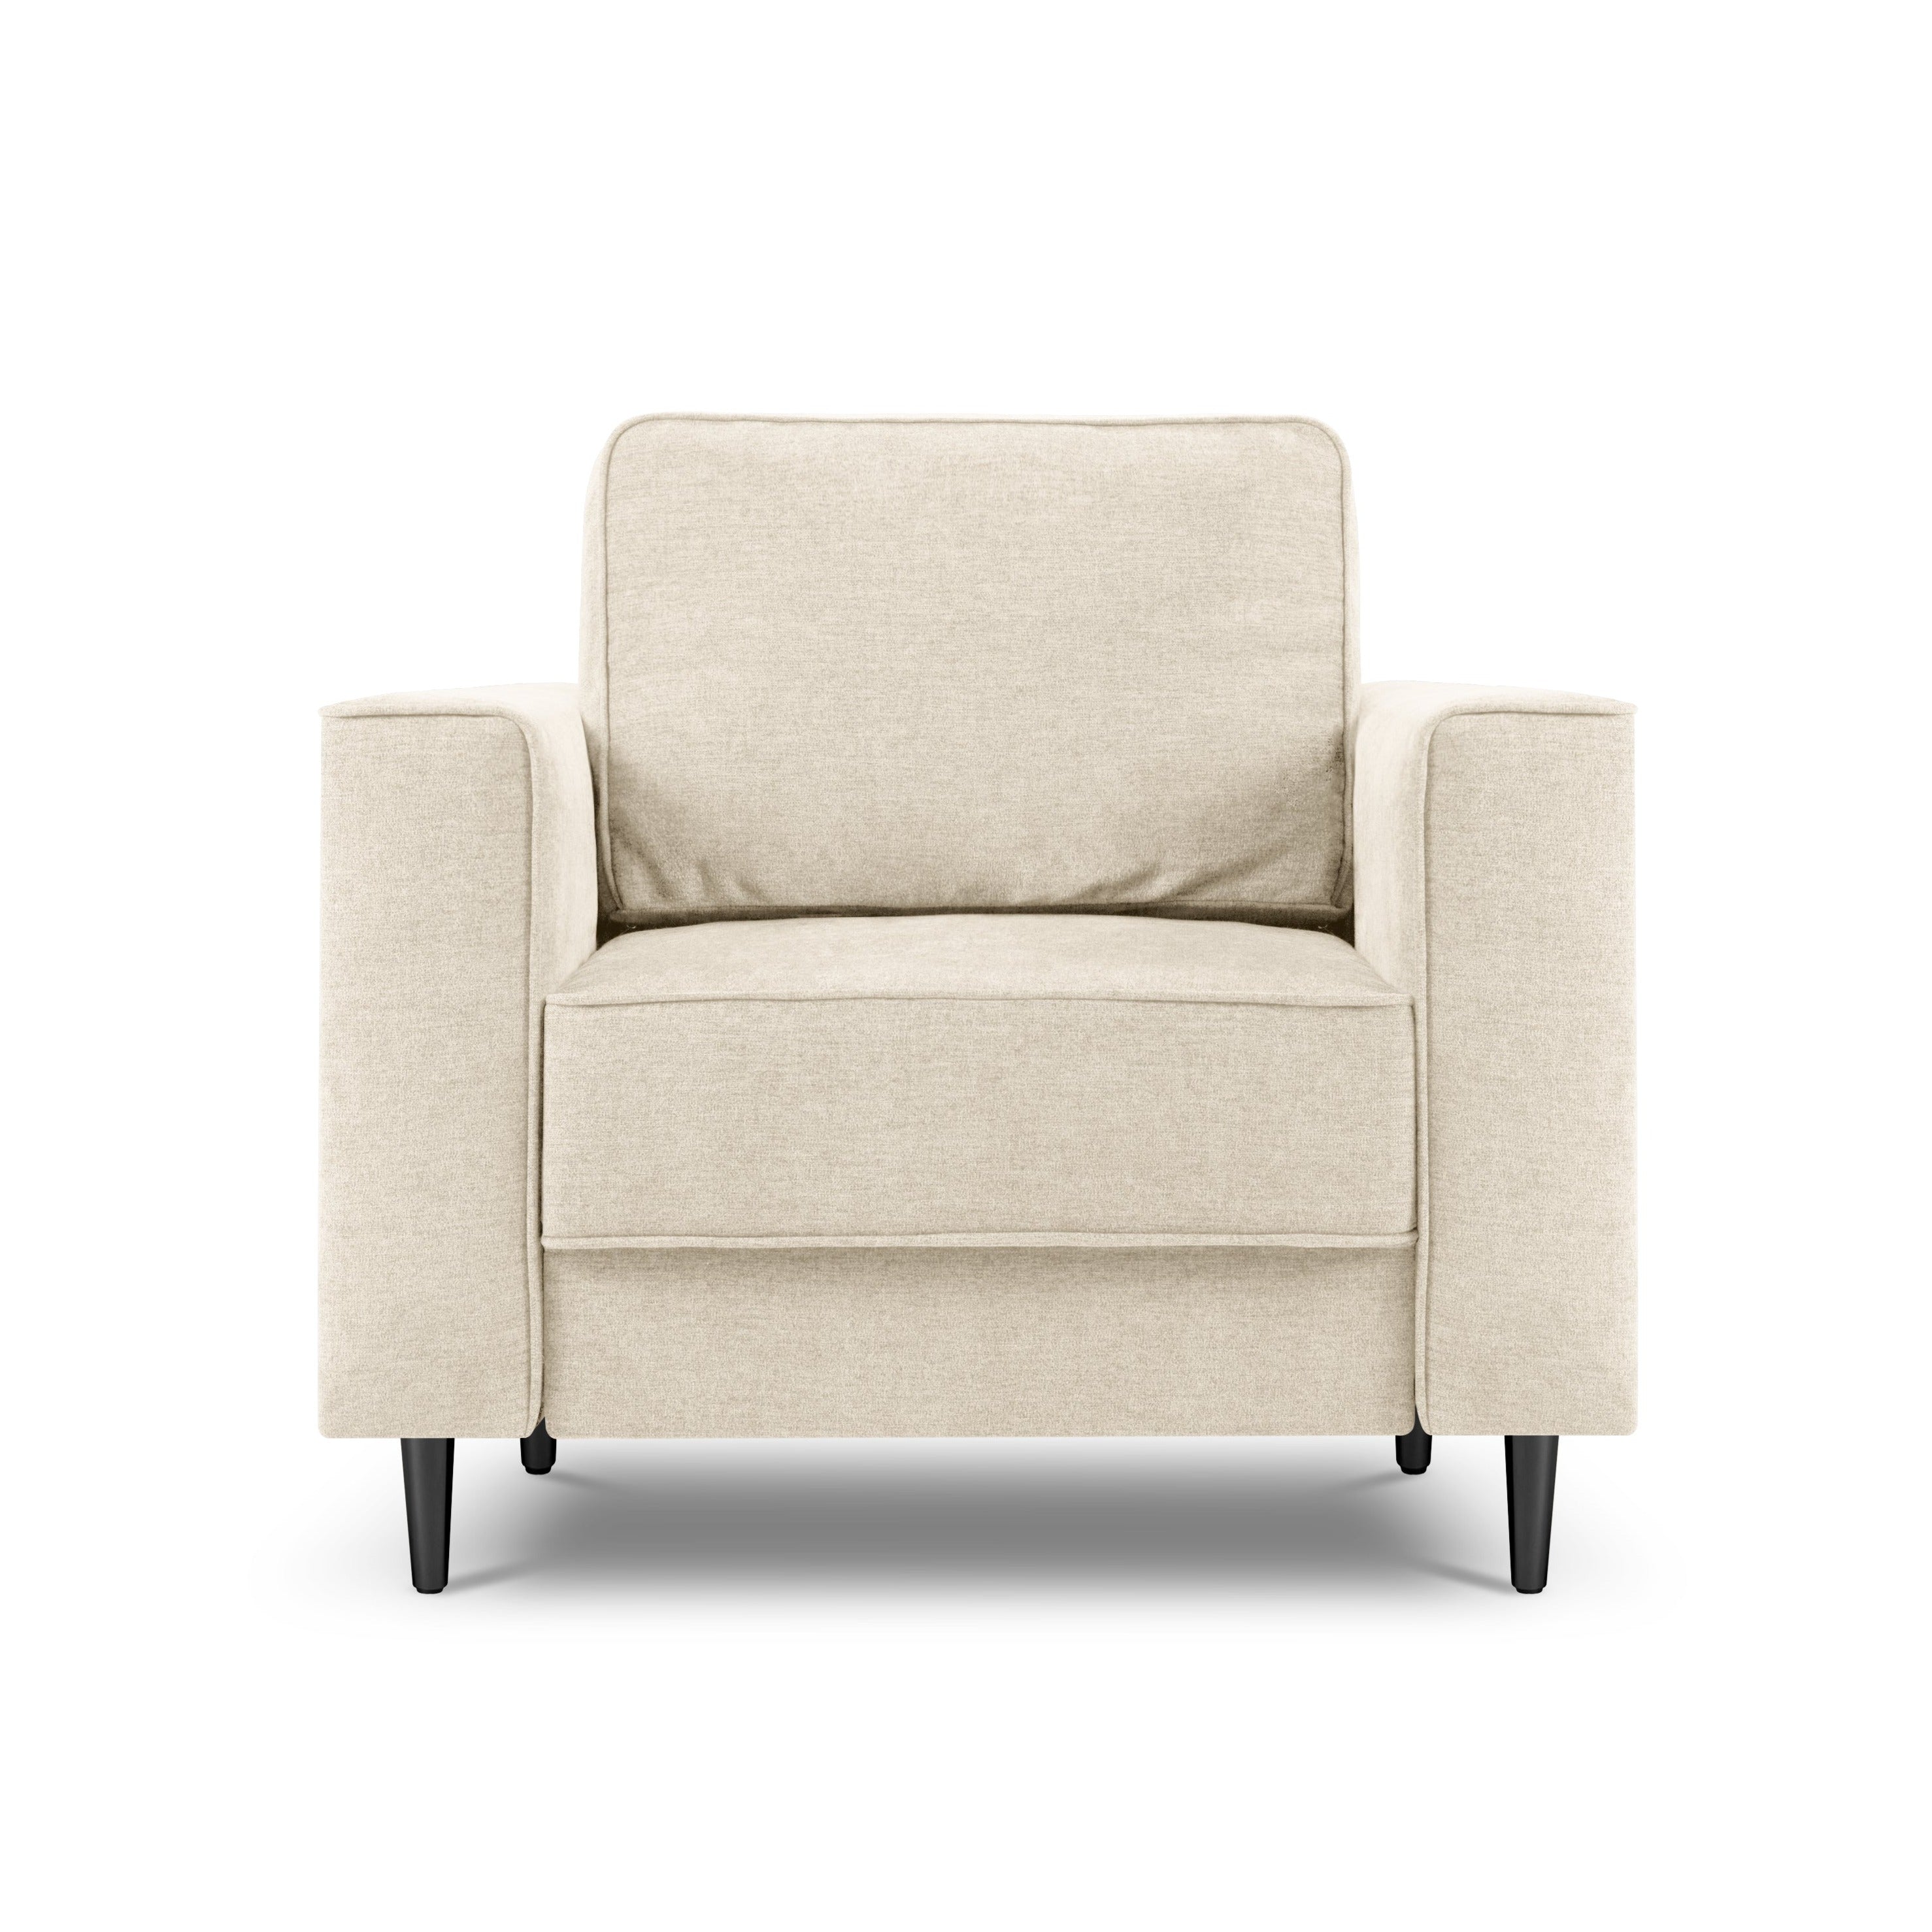 Beige armchair with a black base